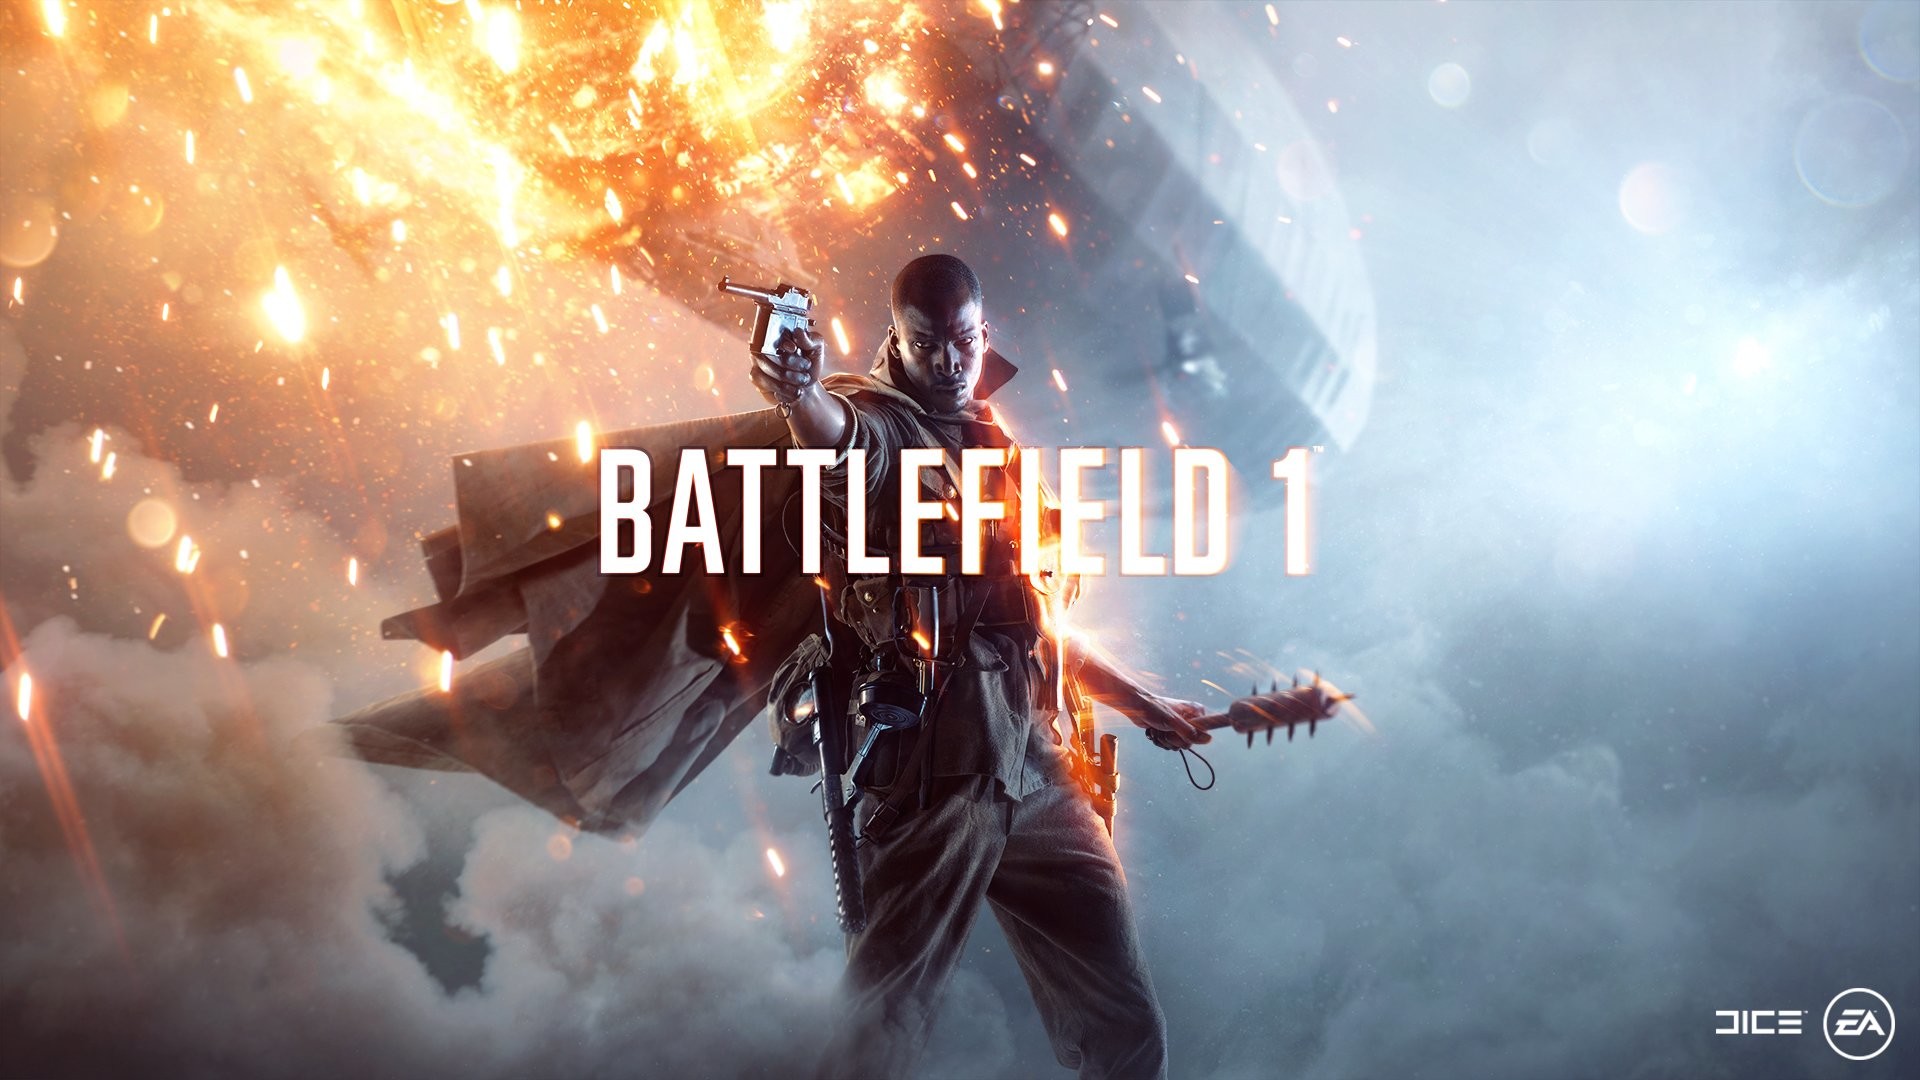 Download Soldier Transparent Bf1 - Battlefield 5 Dual Monitor PNG Image  with No Background - PNGkey.com